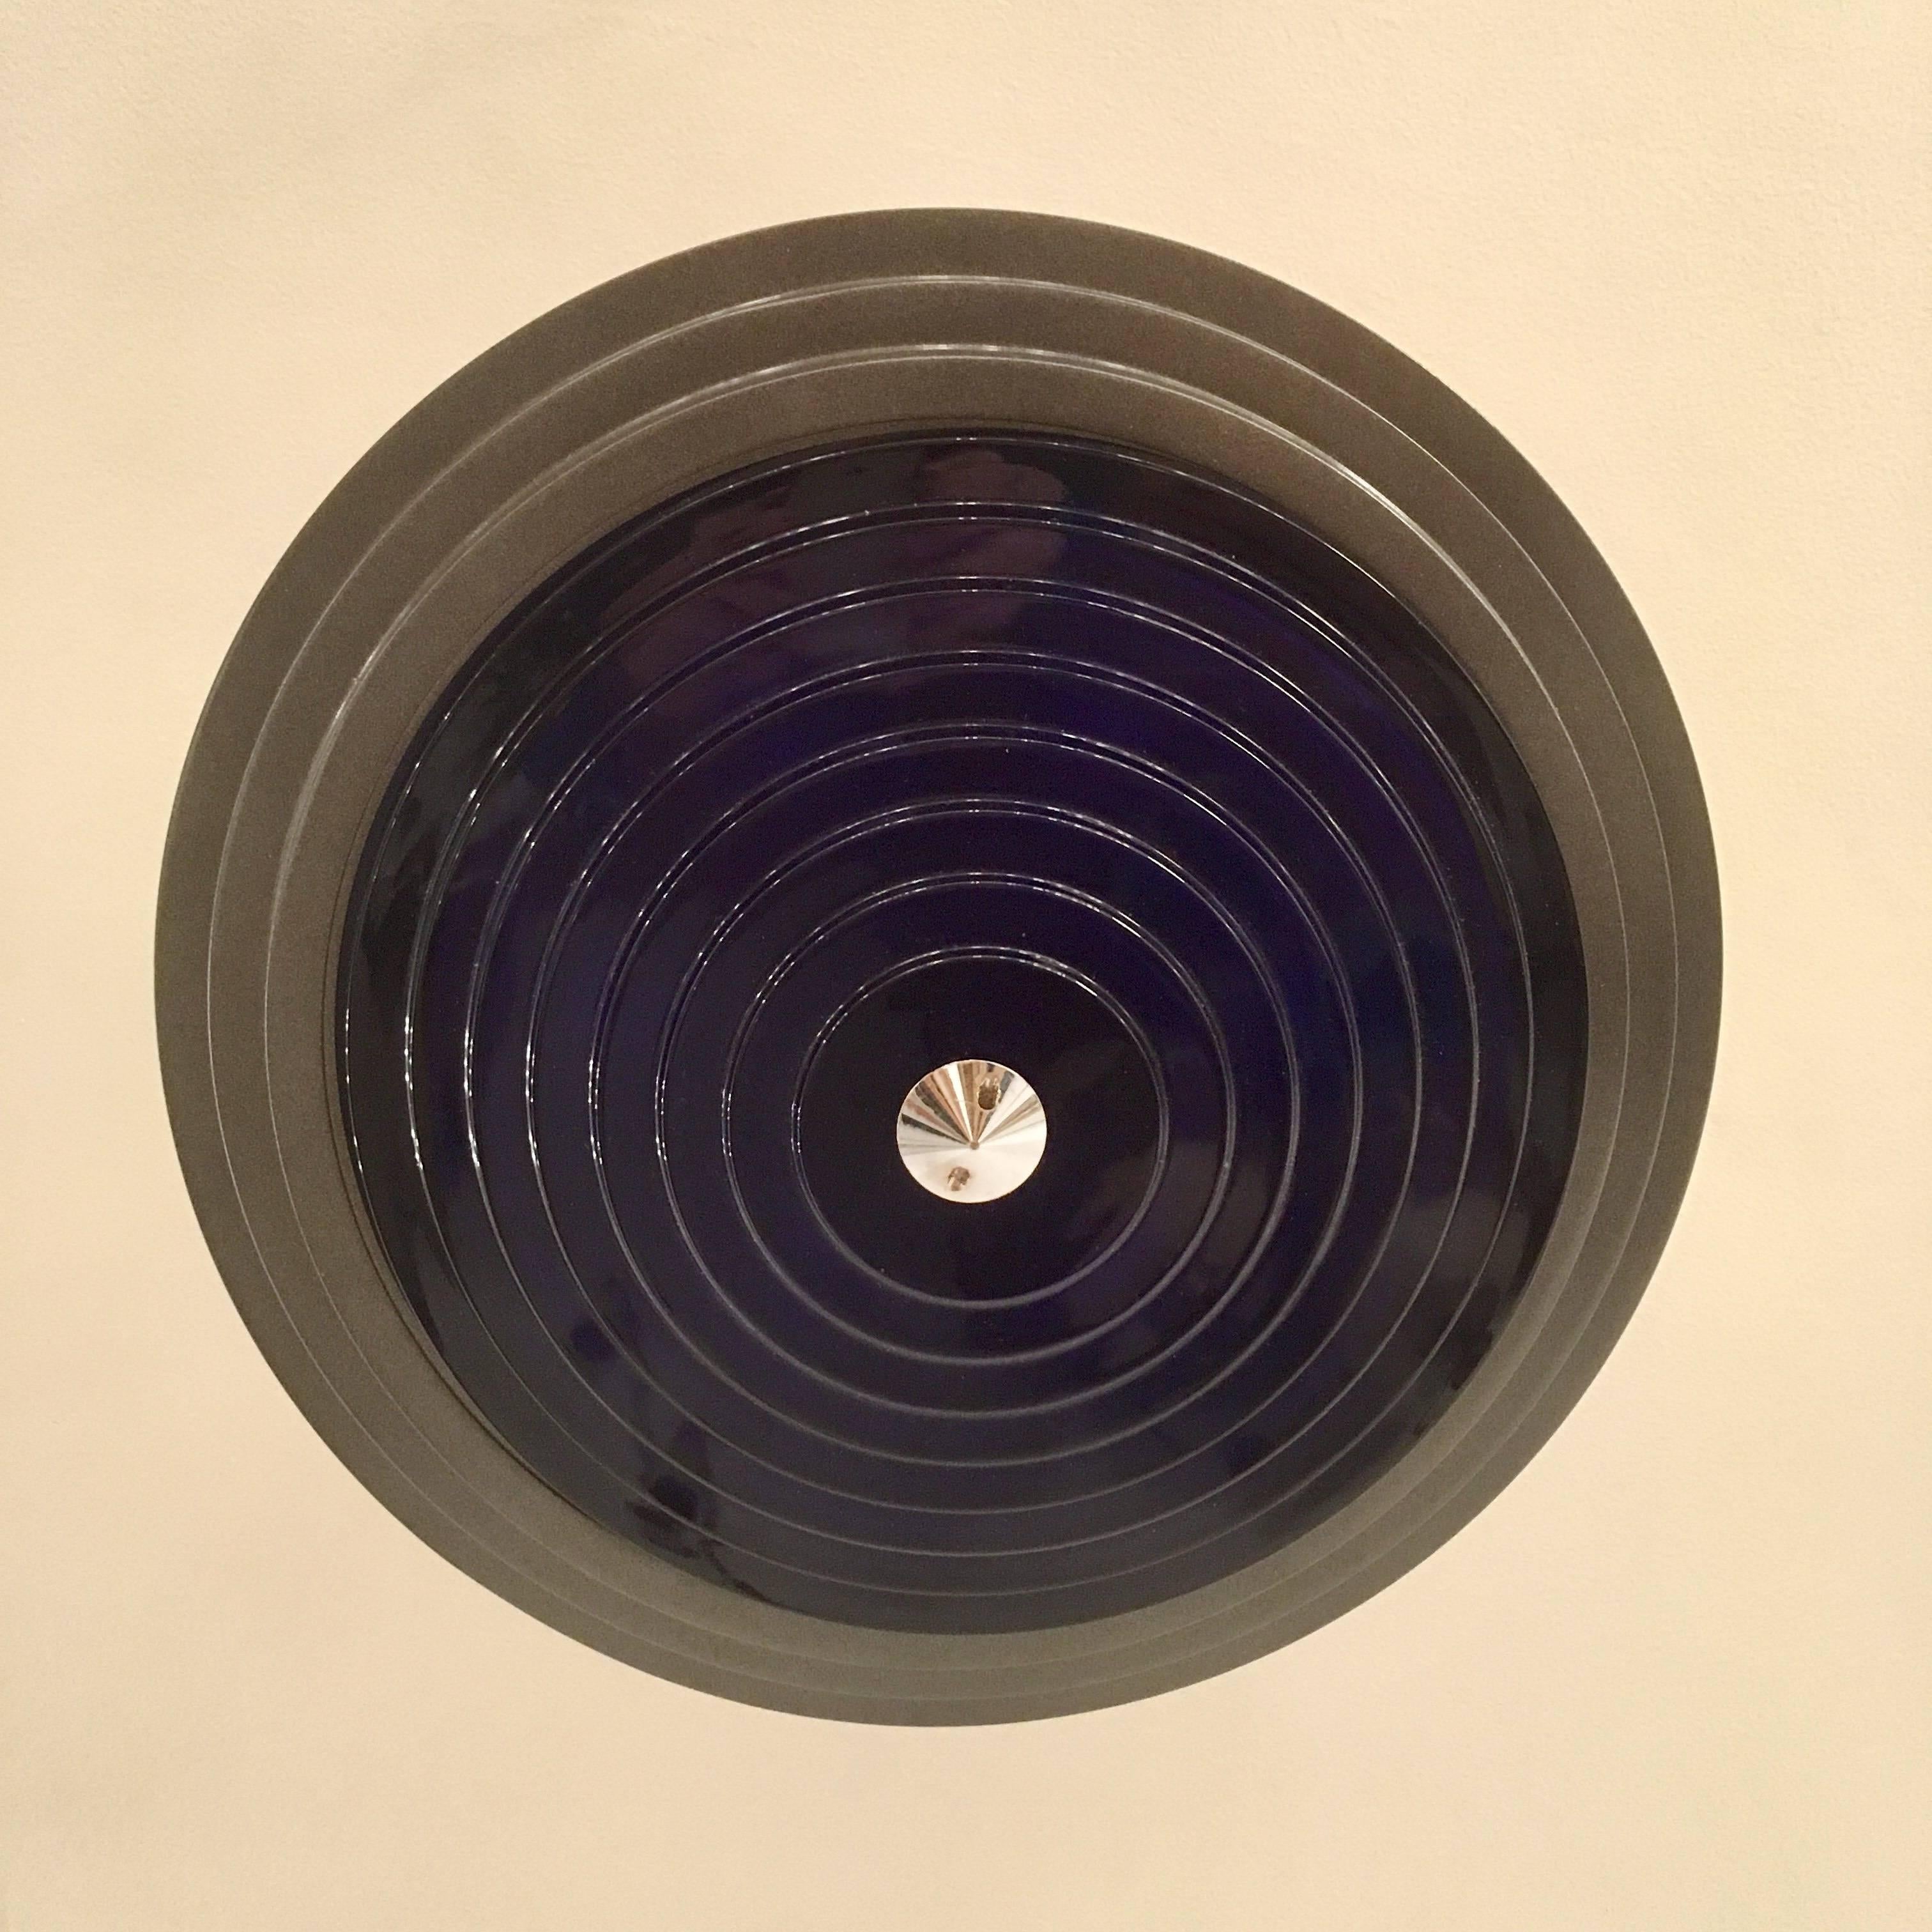 An original 1988 Fontana Arte model # 2792 flush ceiling light composed of a mate gun metal frame and a cobalt blue tiered glass crystal shade with decorative chrome pointed finial. Newly rewired. Signed. Designed by Daniela Puppa and Franco Raggi.